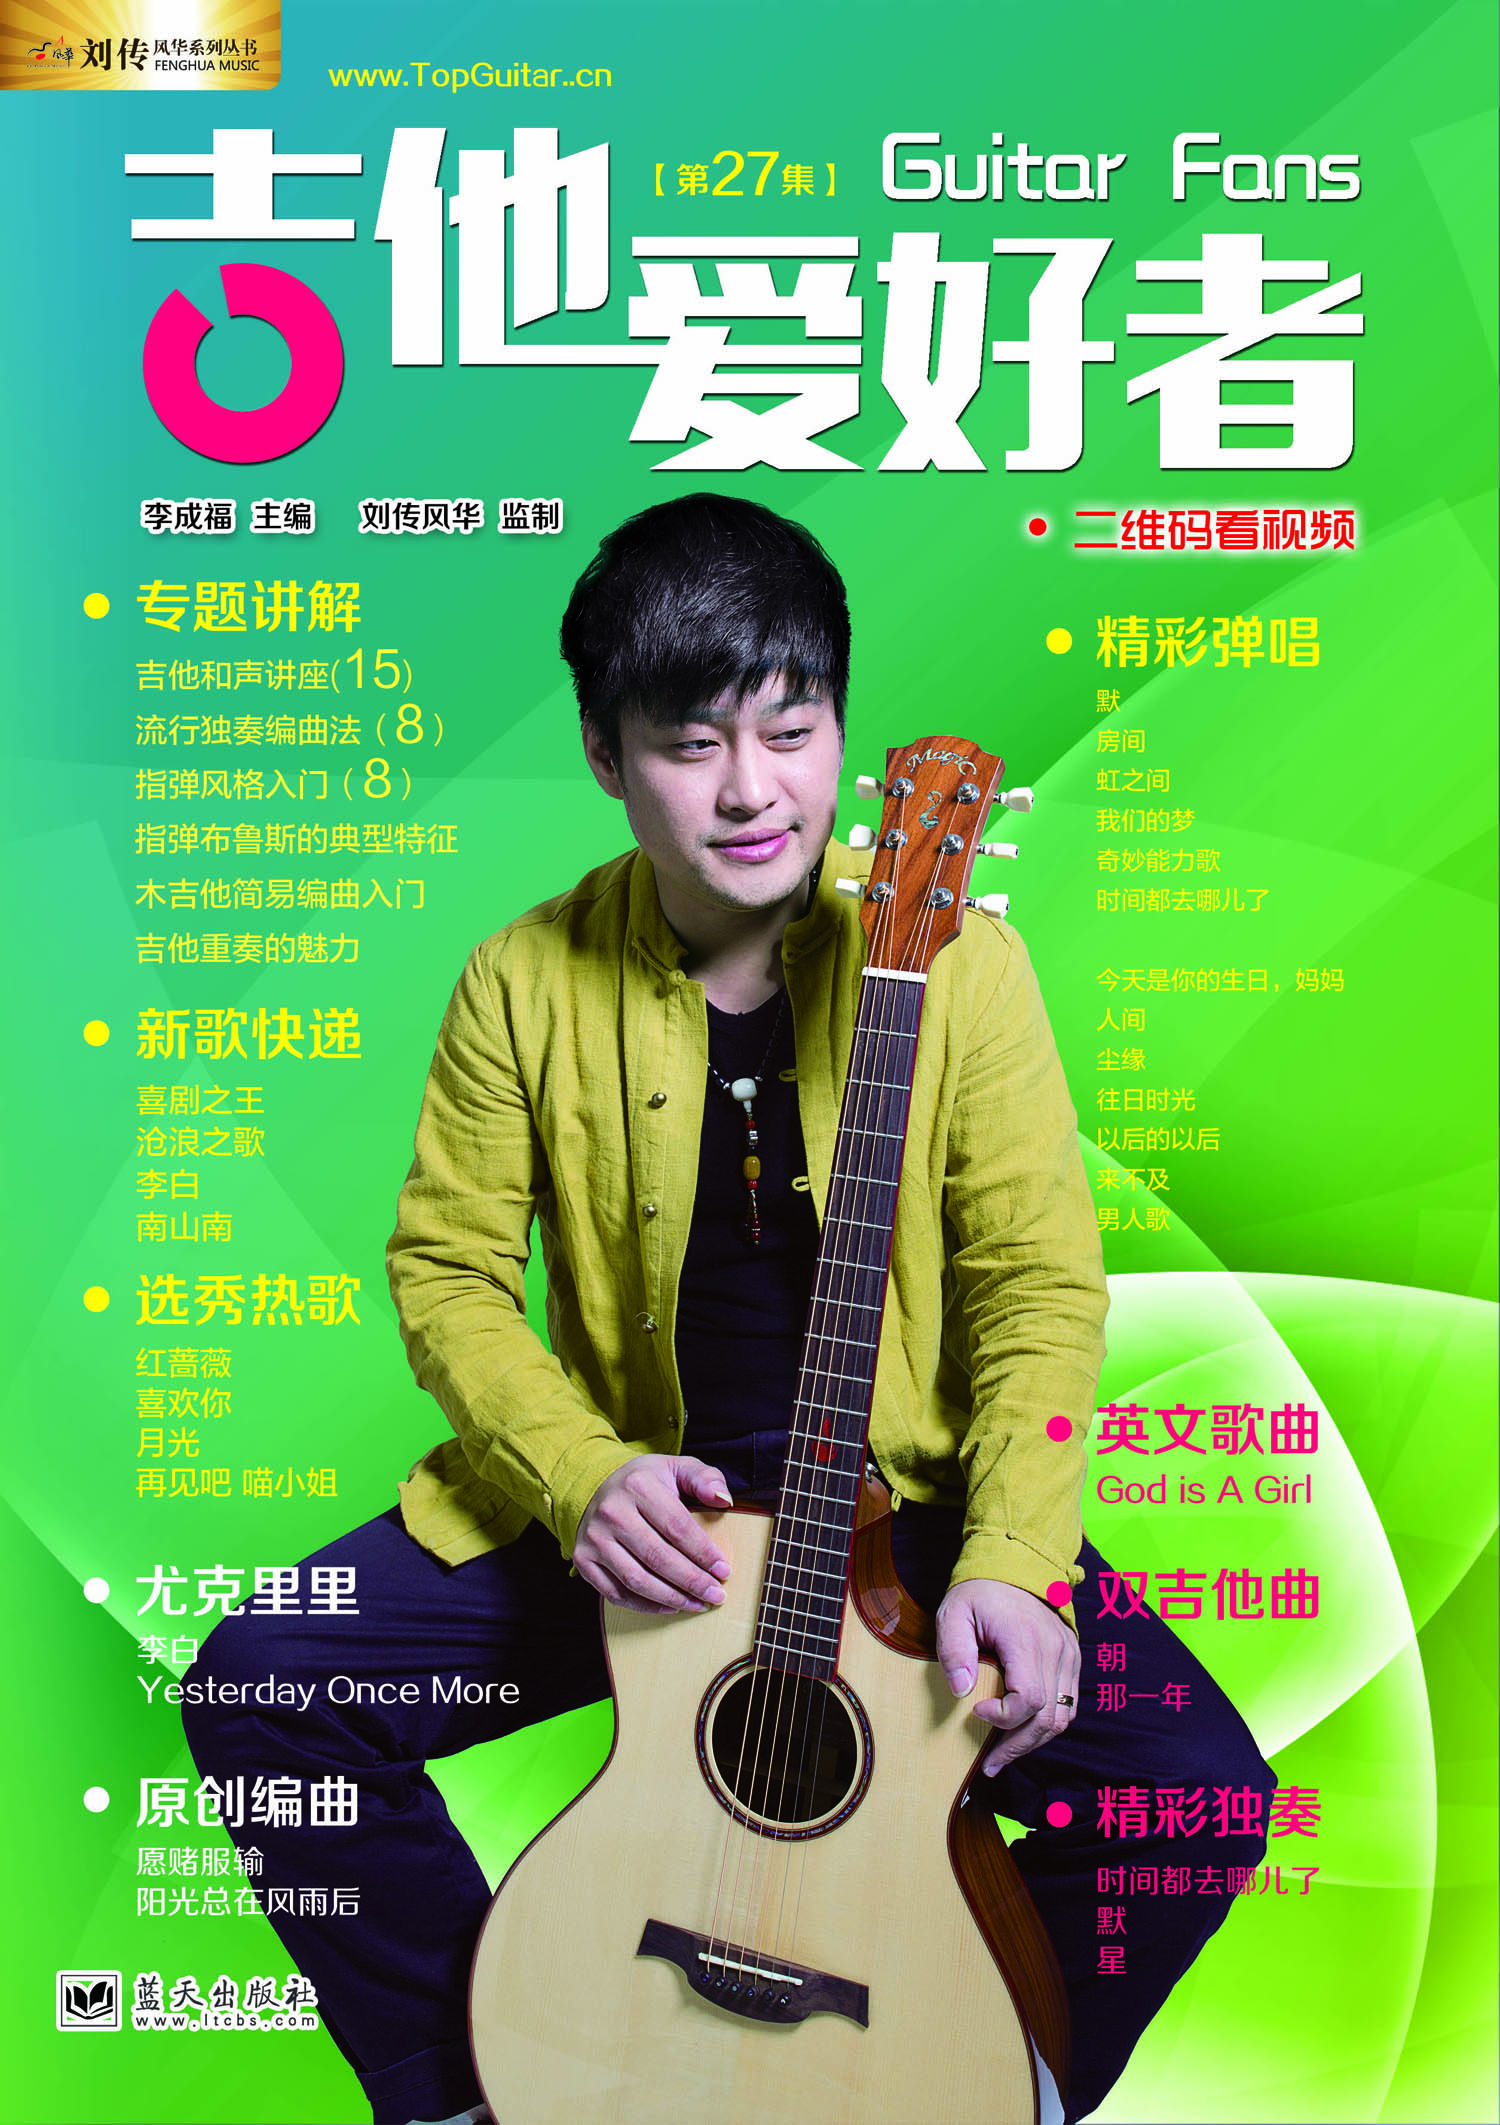 CK Chen and Magic Guitars covered the 27th issue of Guitar Fans Magazine